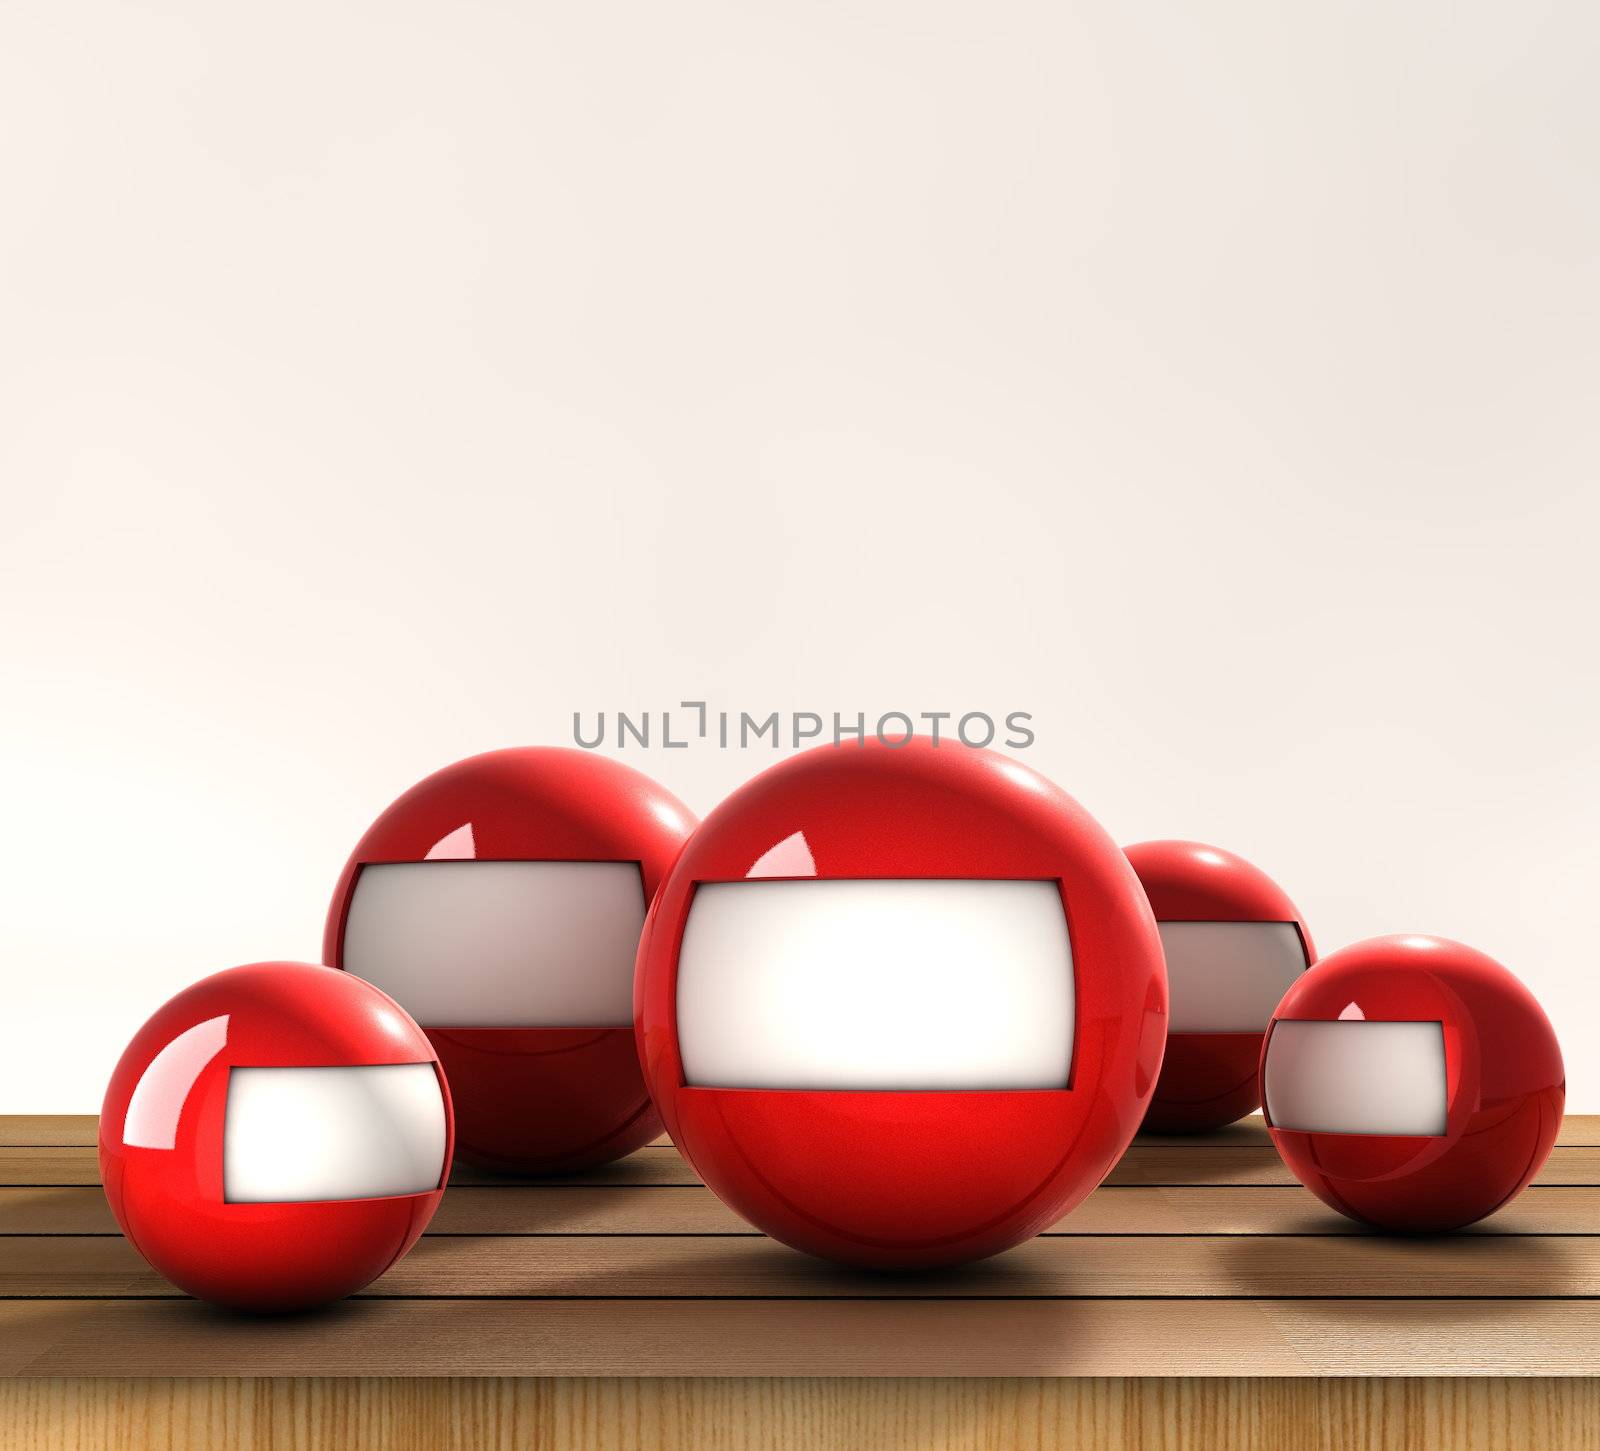 Spheres on table by dynamicfoto